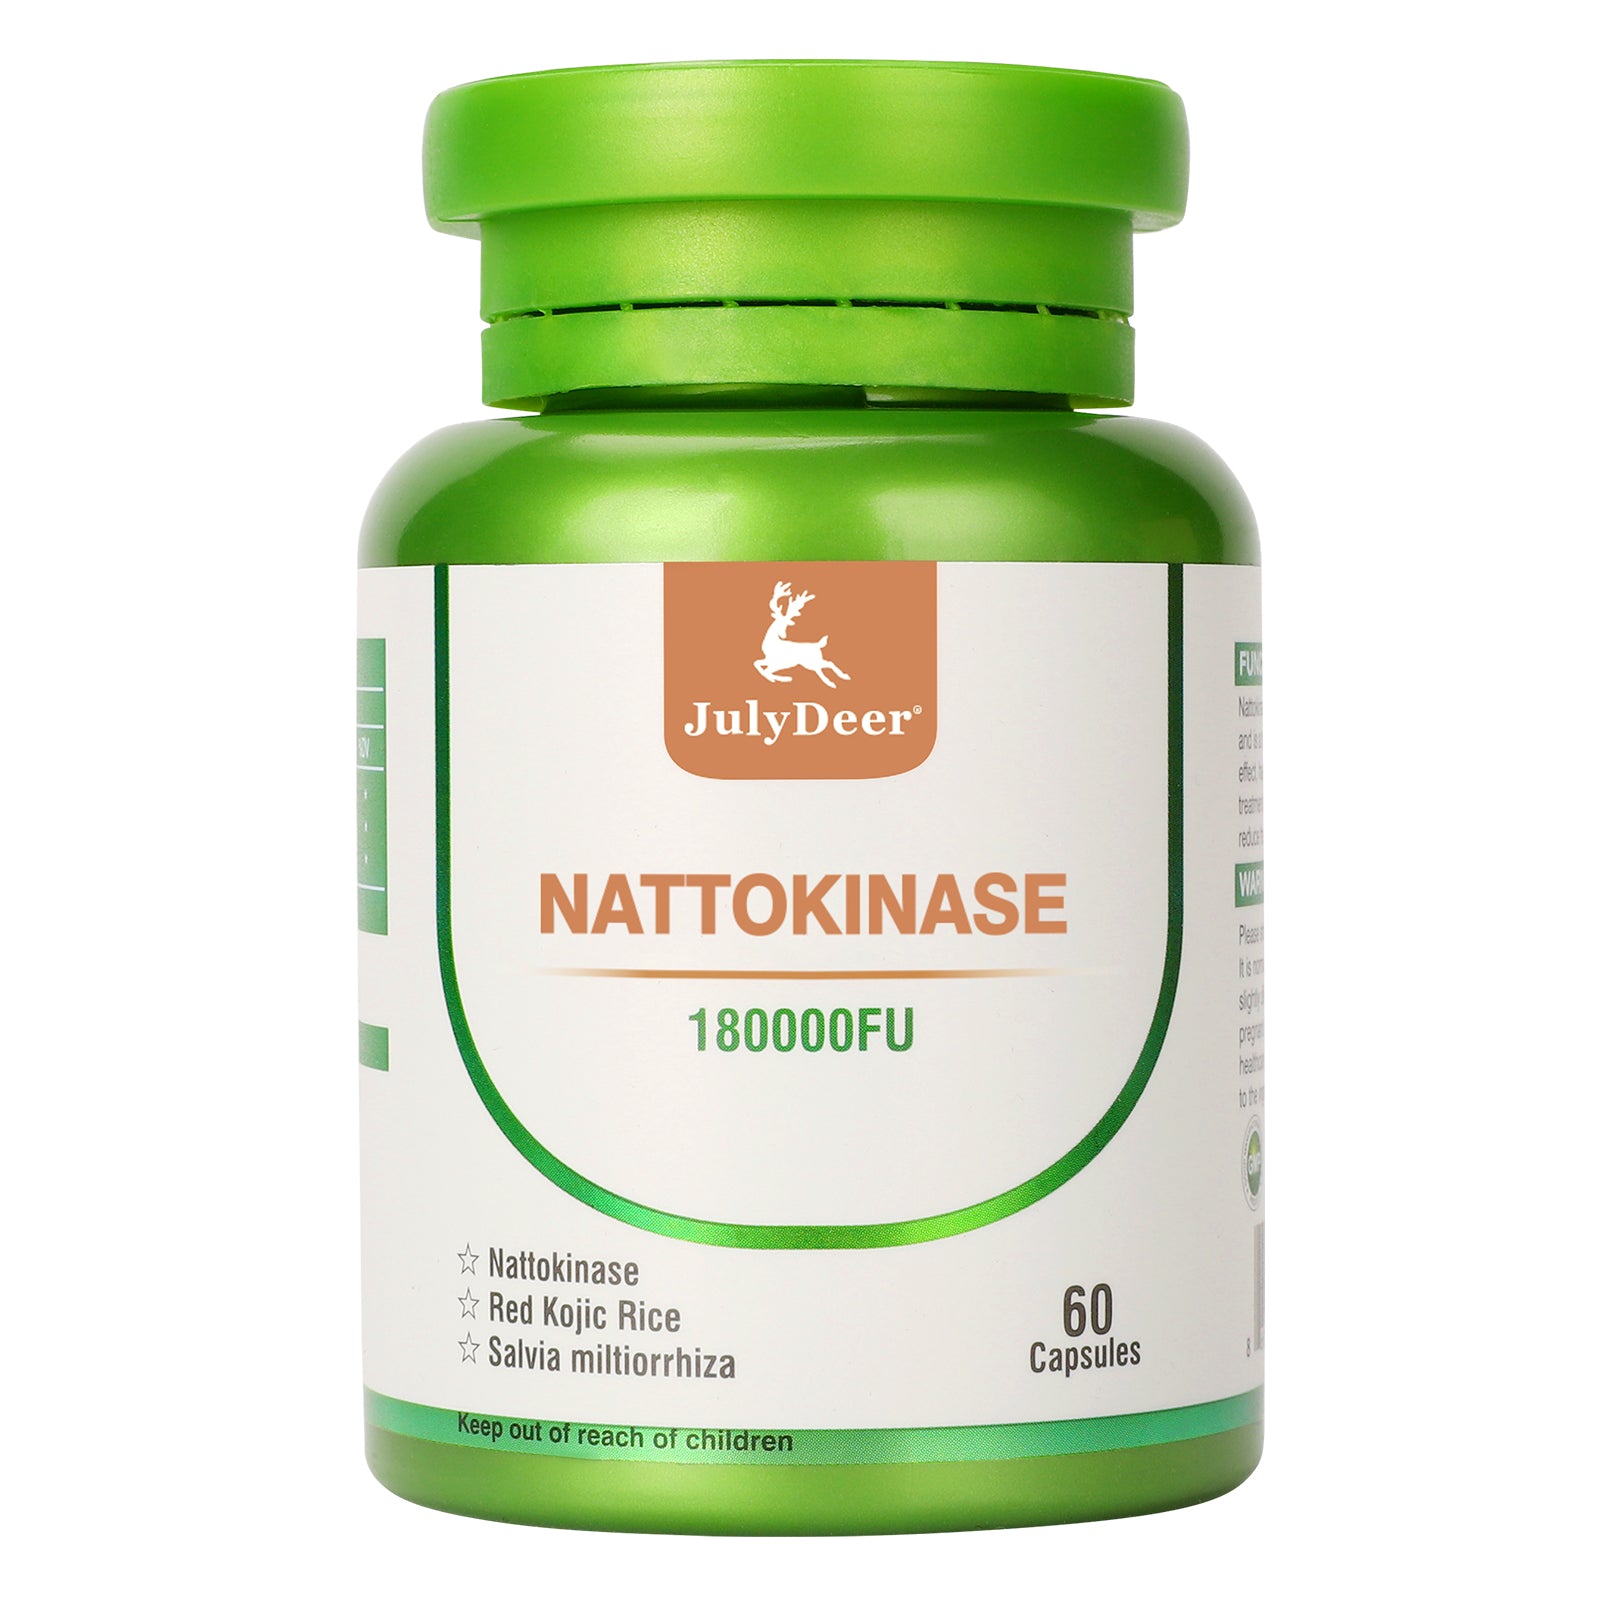 JulyDeer Nattokinase Supplement 180,000 FU Servings - Non-GMO Soy, 60 Capsules Systemic Enzymes for Cardiovascular and Circulatory Support